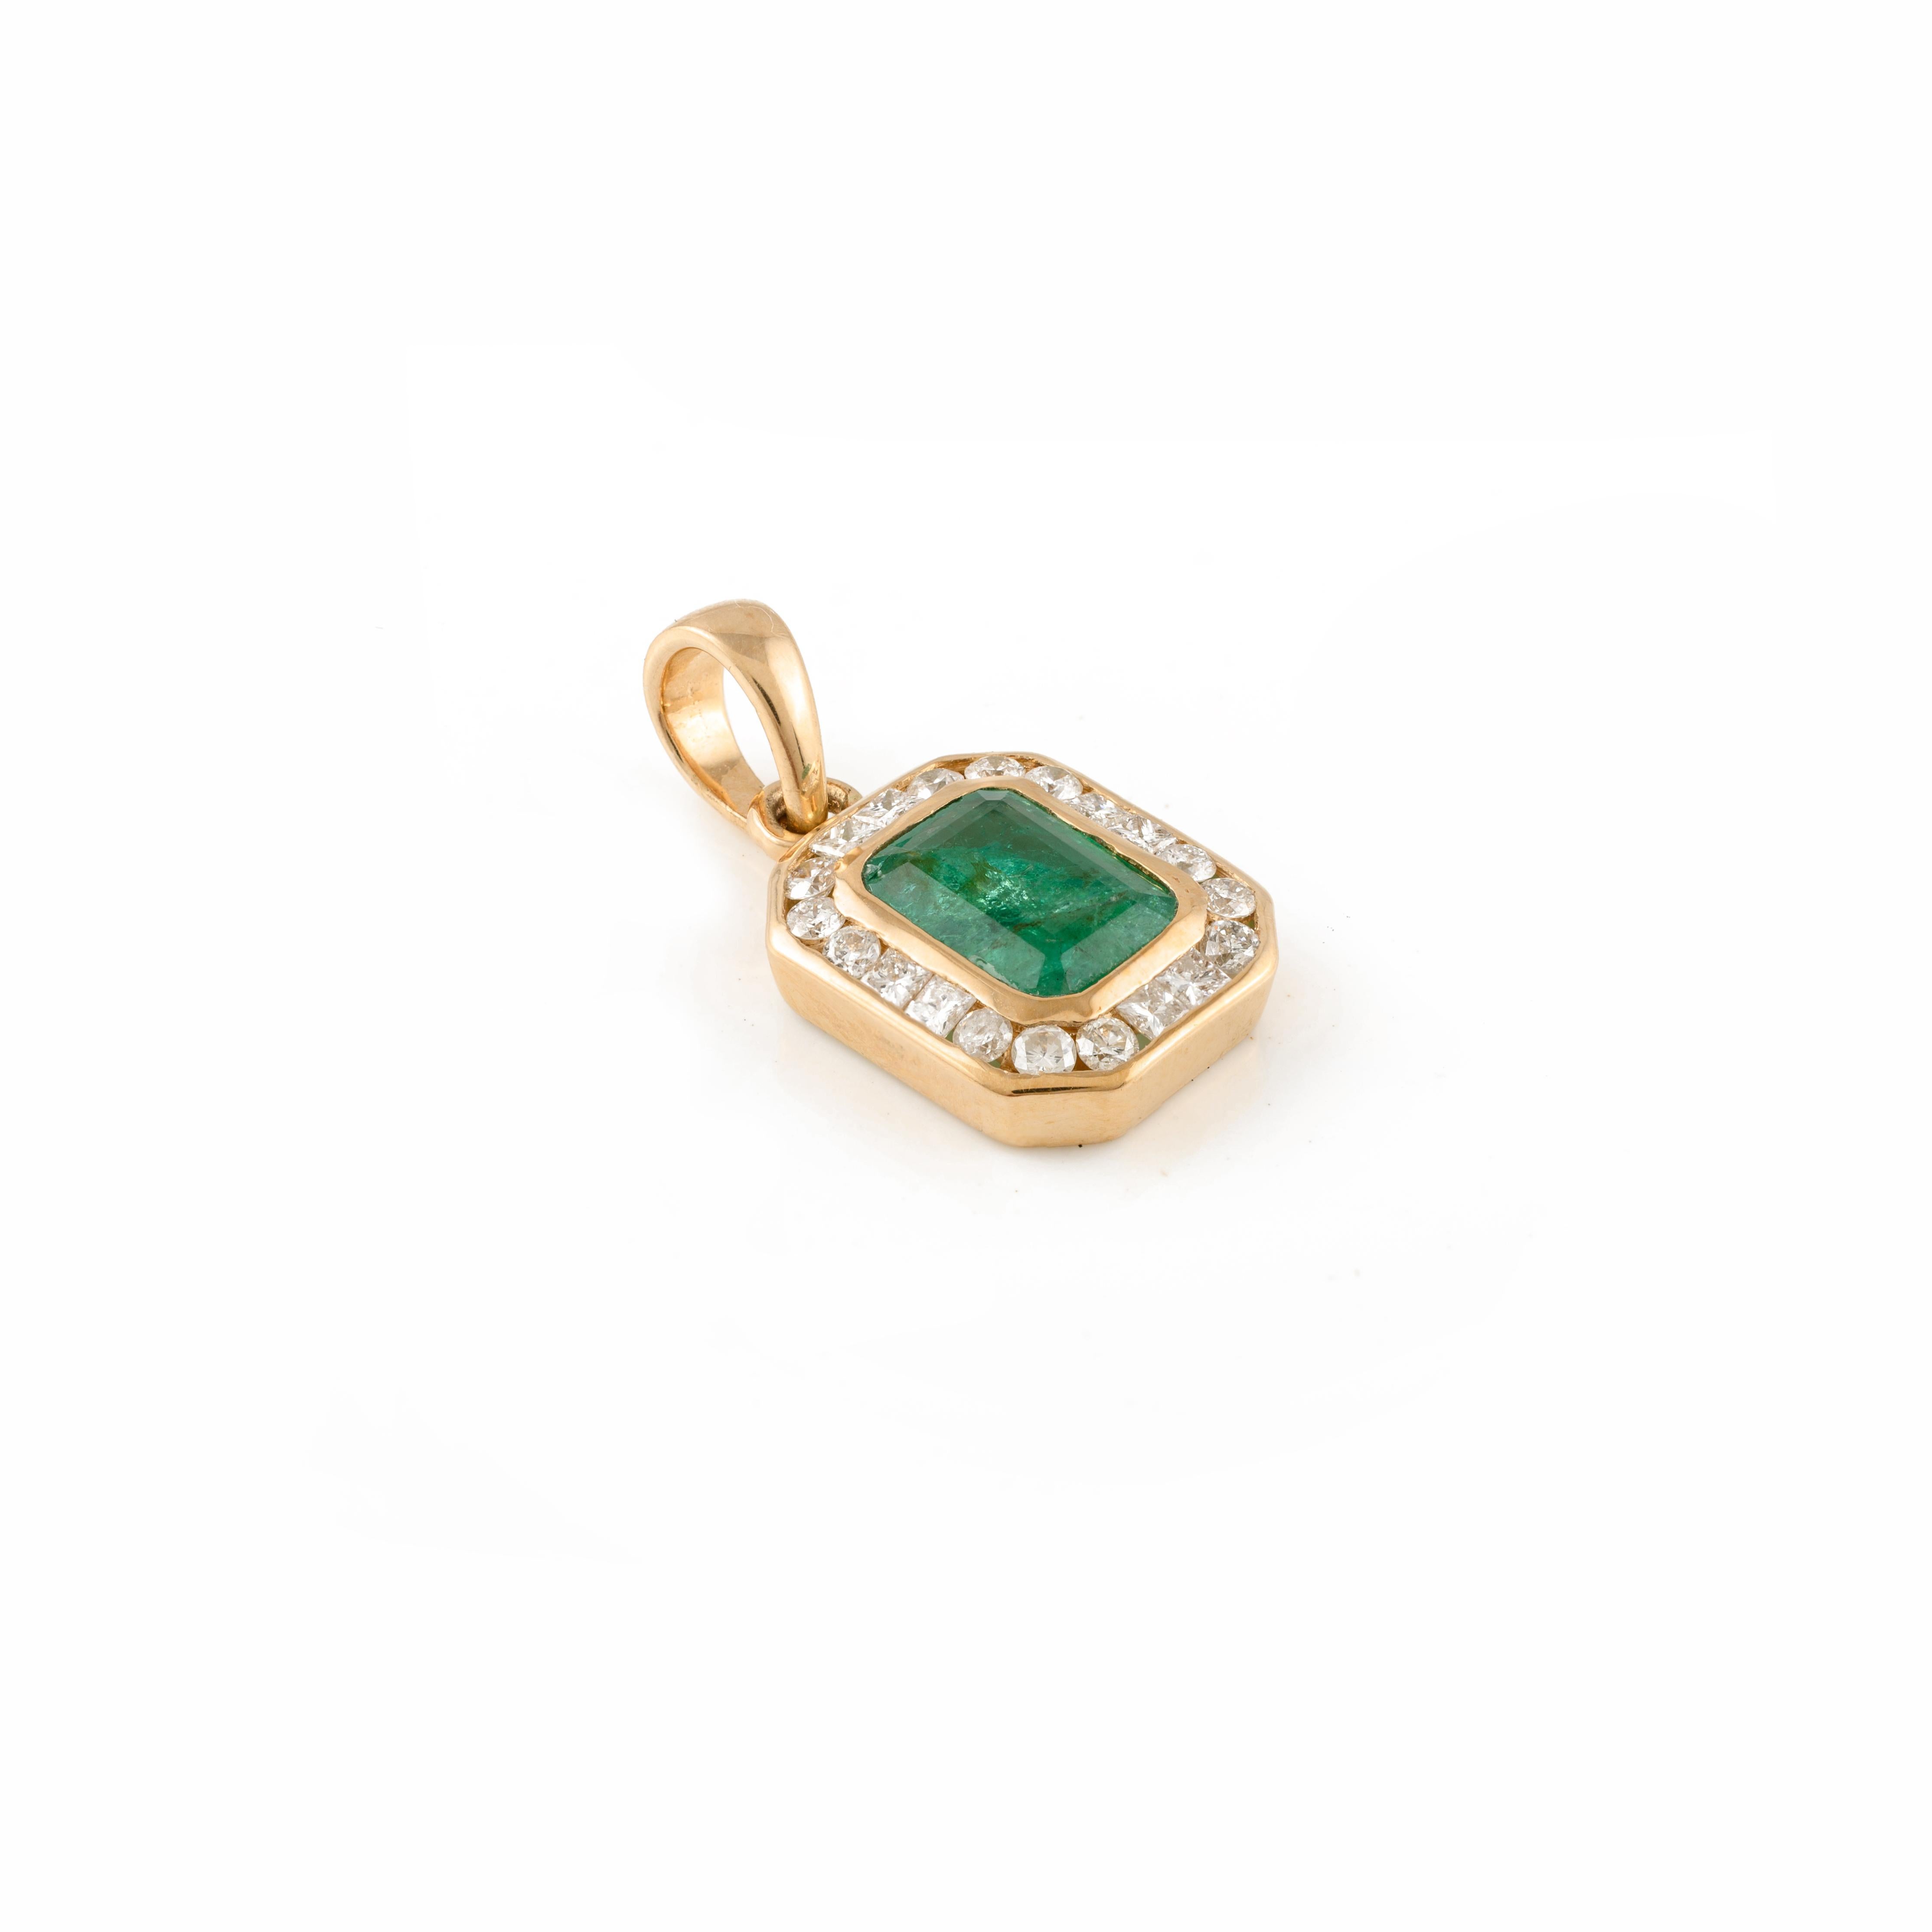 Contemporary Emerald Halo Diamond Pendant in 14K Gold studded with octagon cut emerald. This stunning piece of jewelry instantly elevates a casual look or dressy outfit. 
Emerald enhances intellectual capacity of the person. 
Designed with octagon